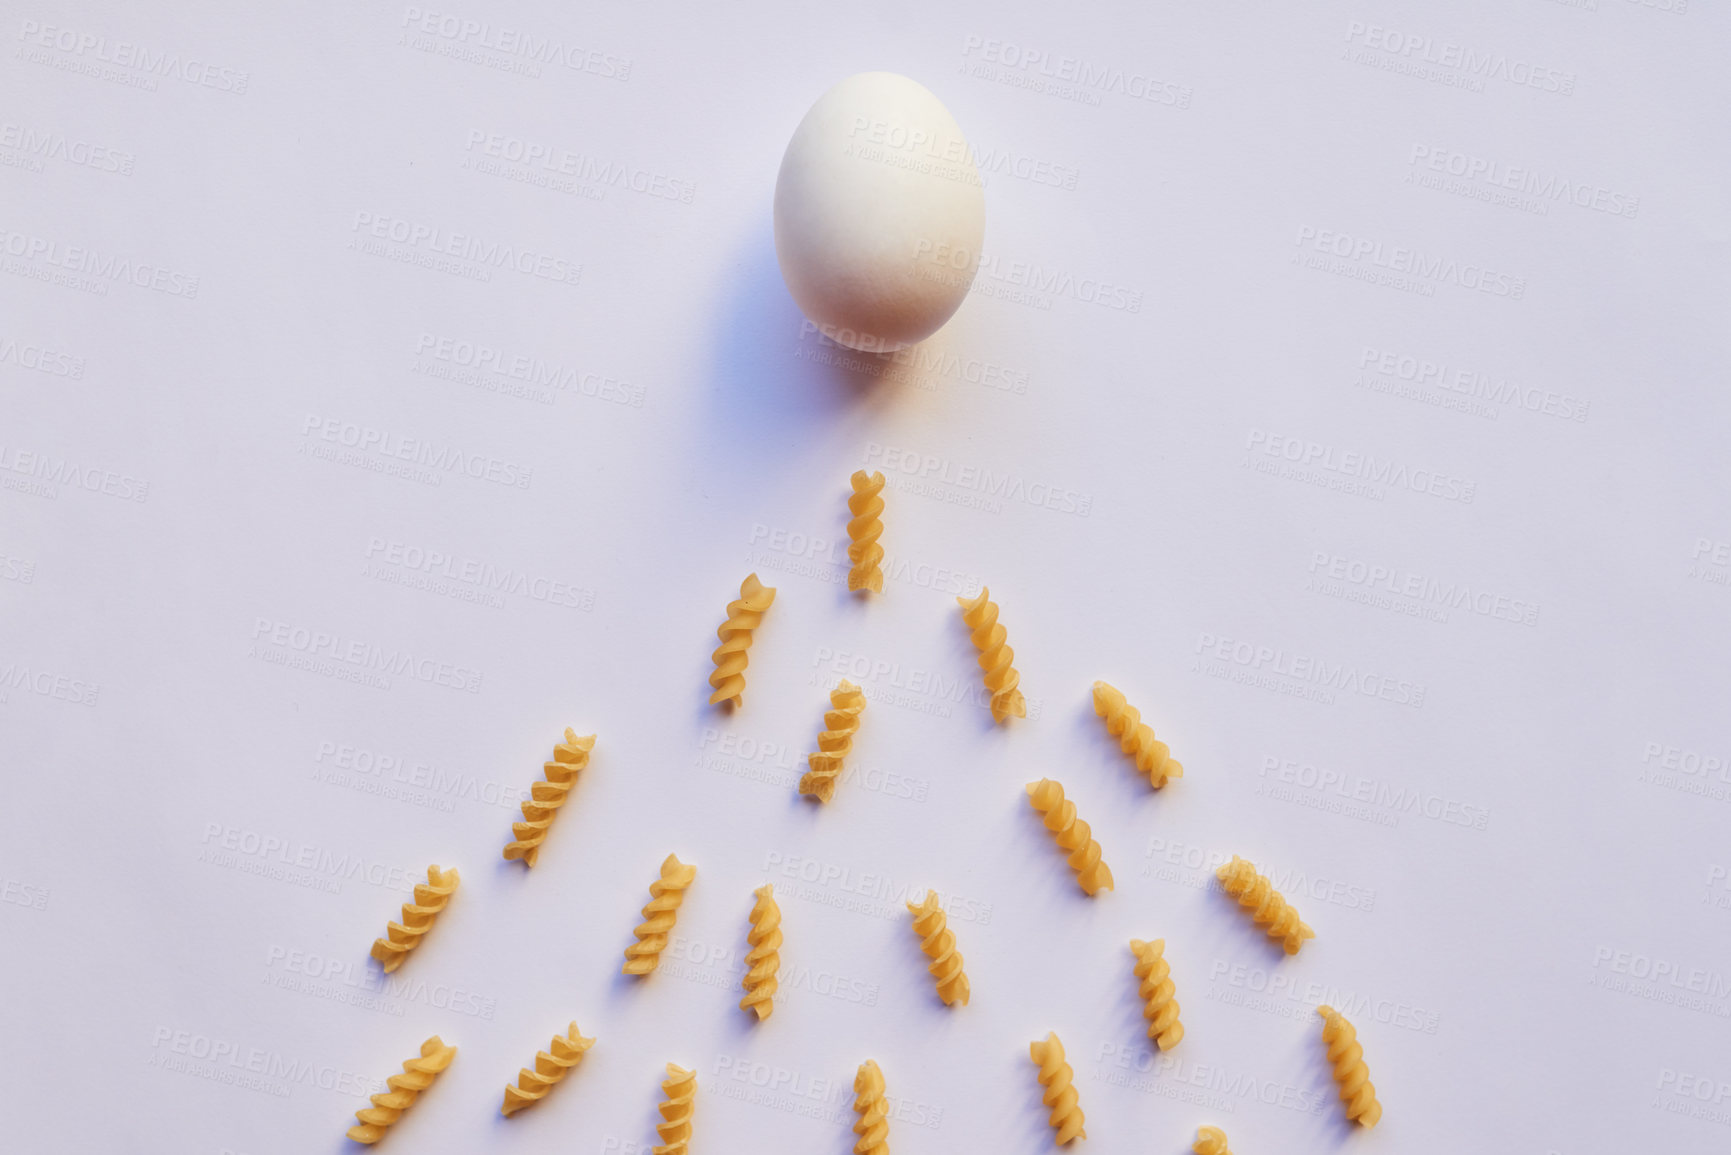 Buy stock photo Studio shot of an egg against a grey background while being surrounded by lots of little pieces of pasta